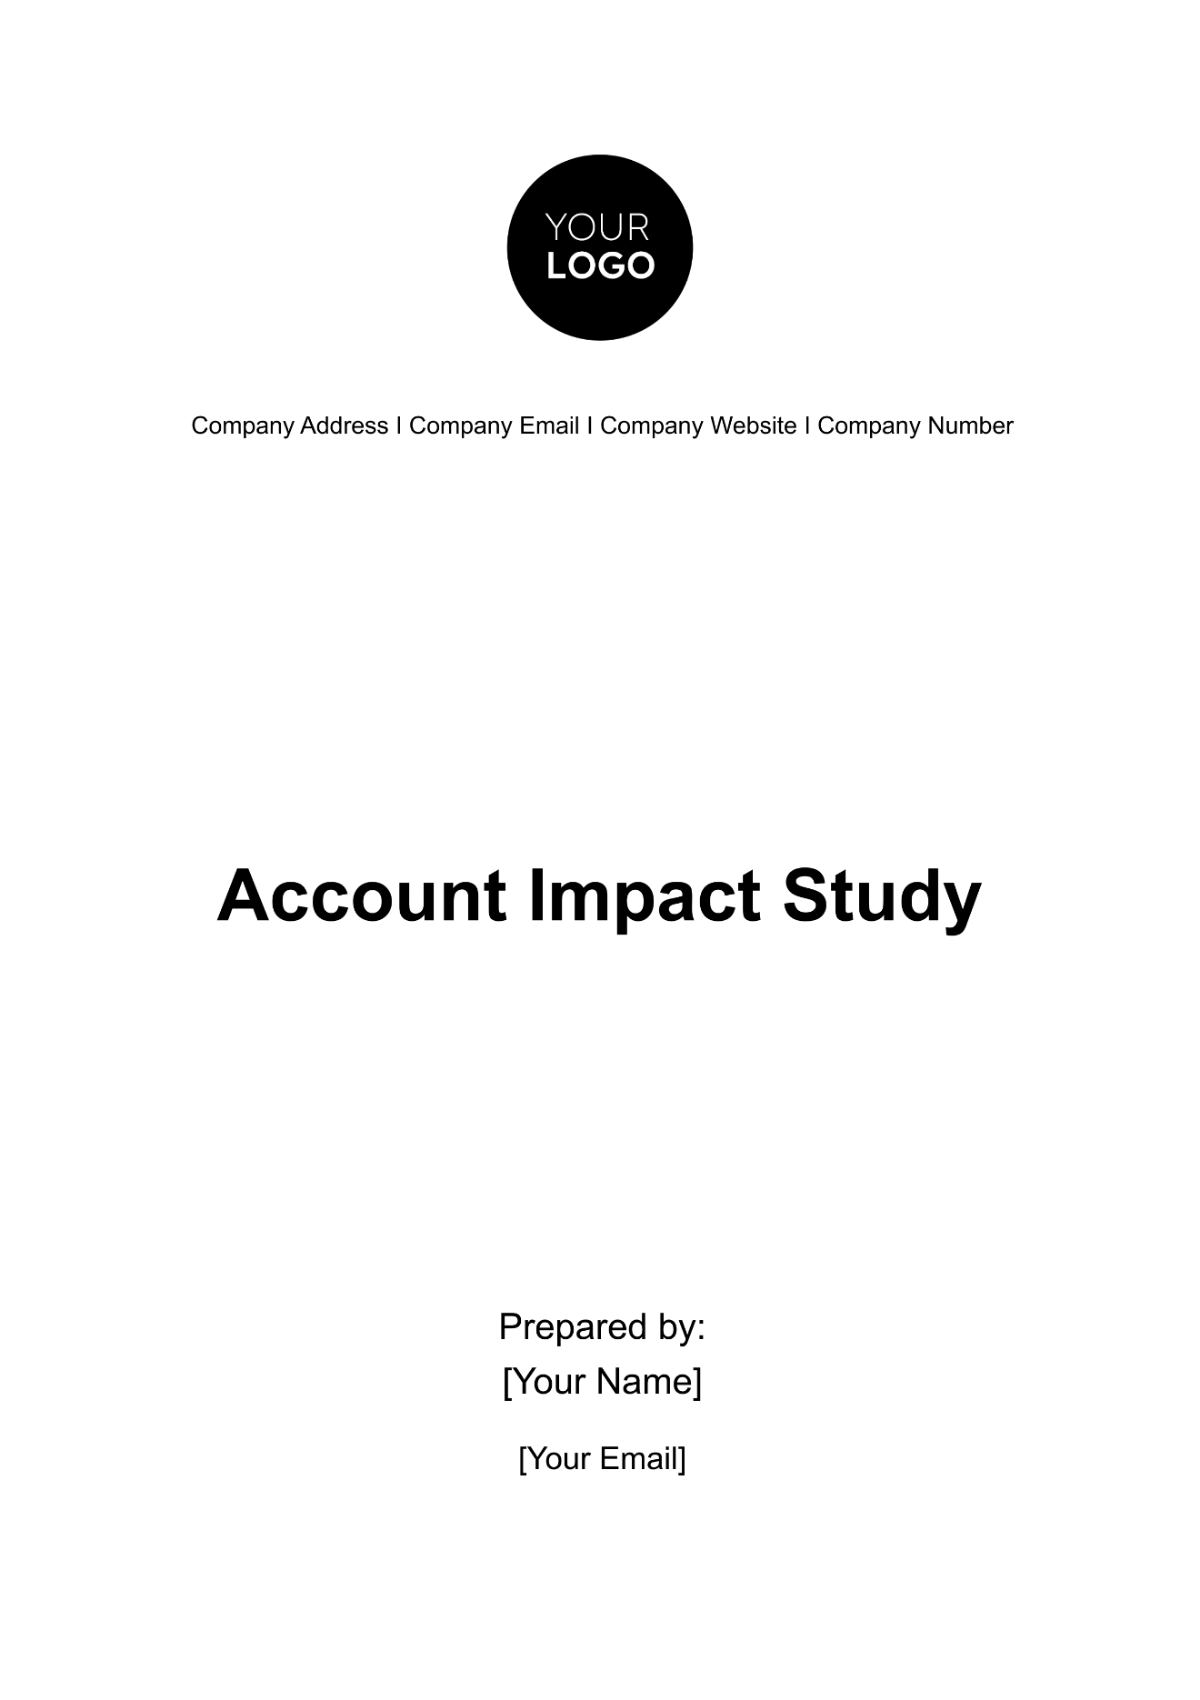 Account Impact Study Template